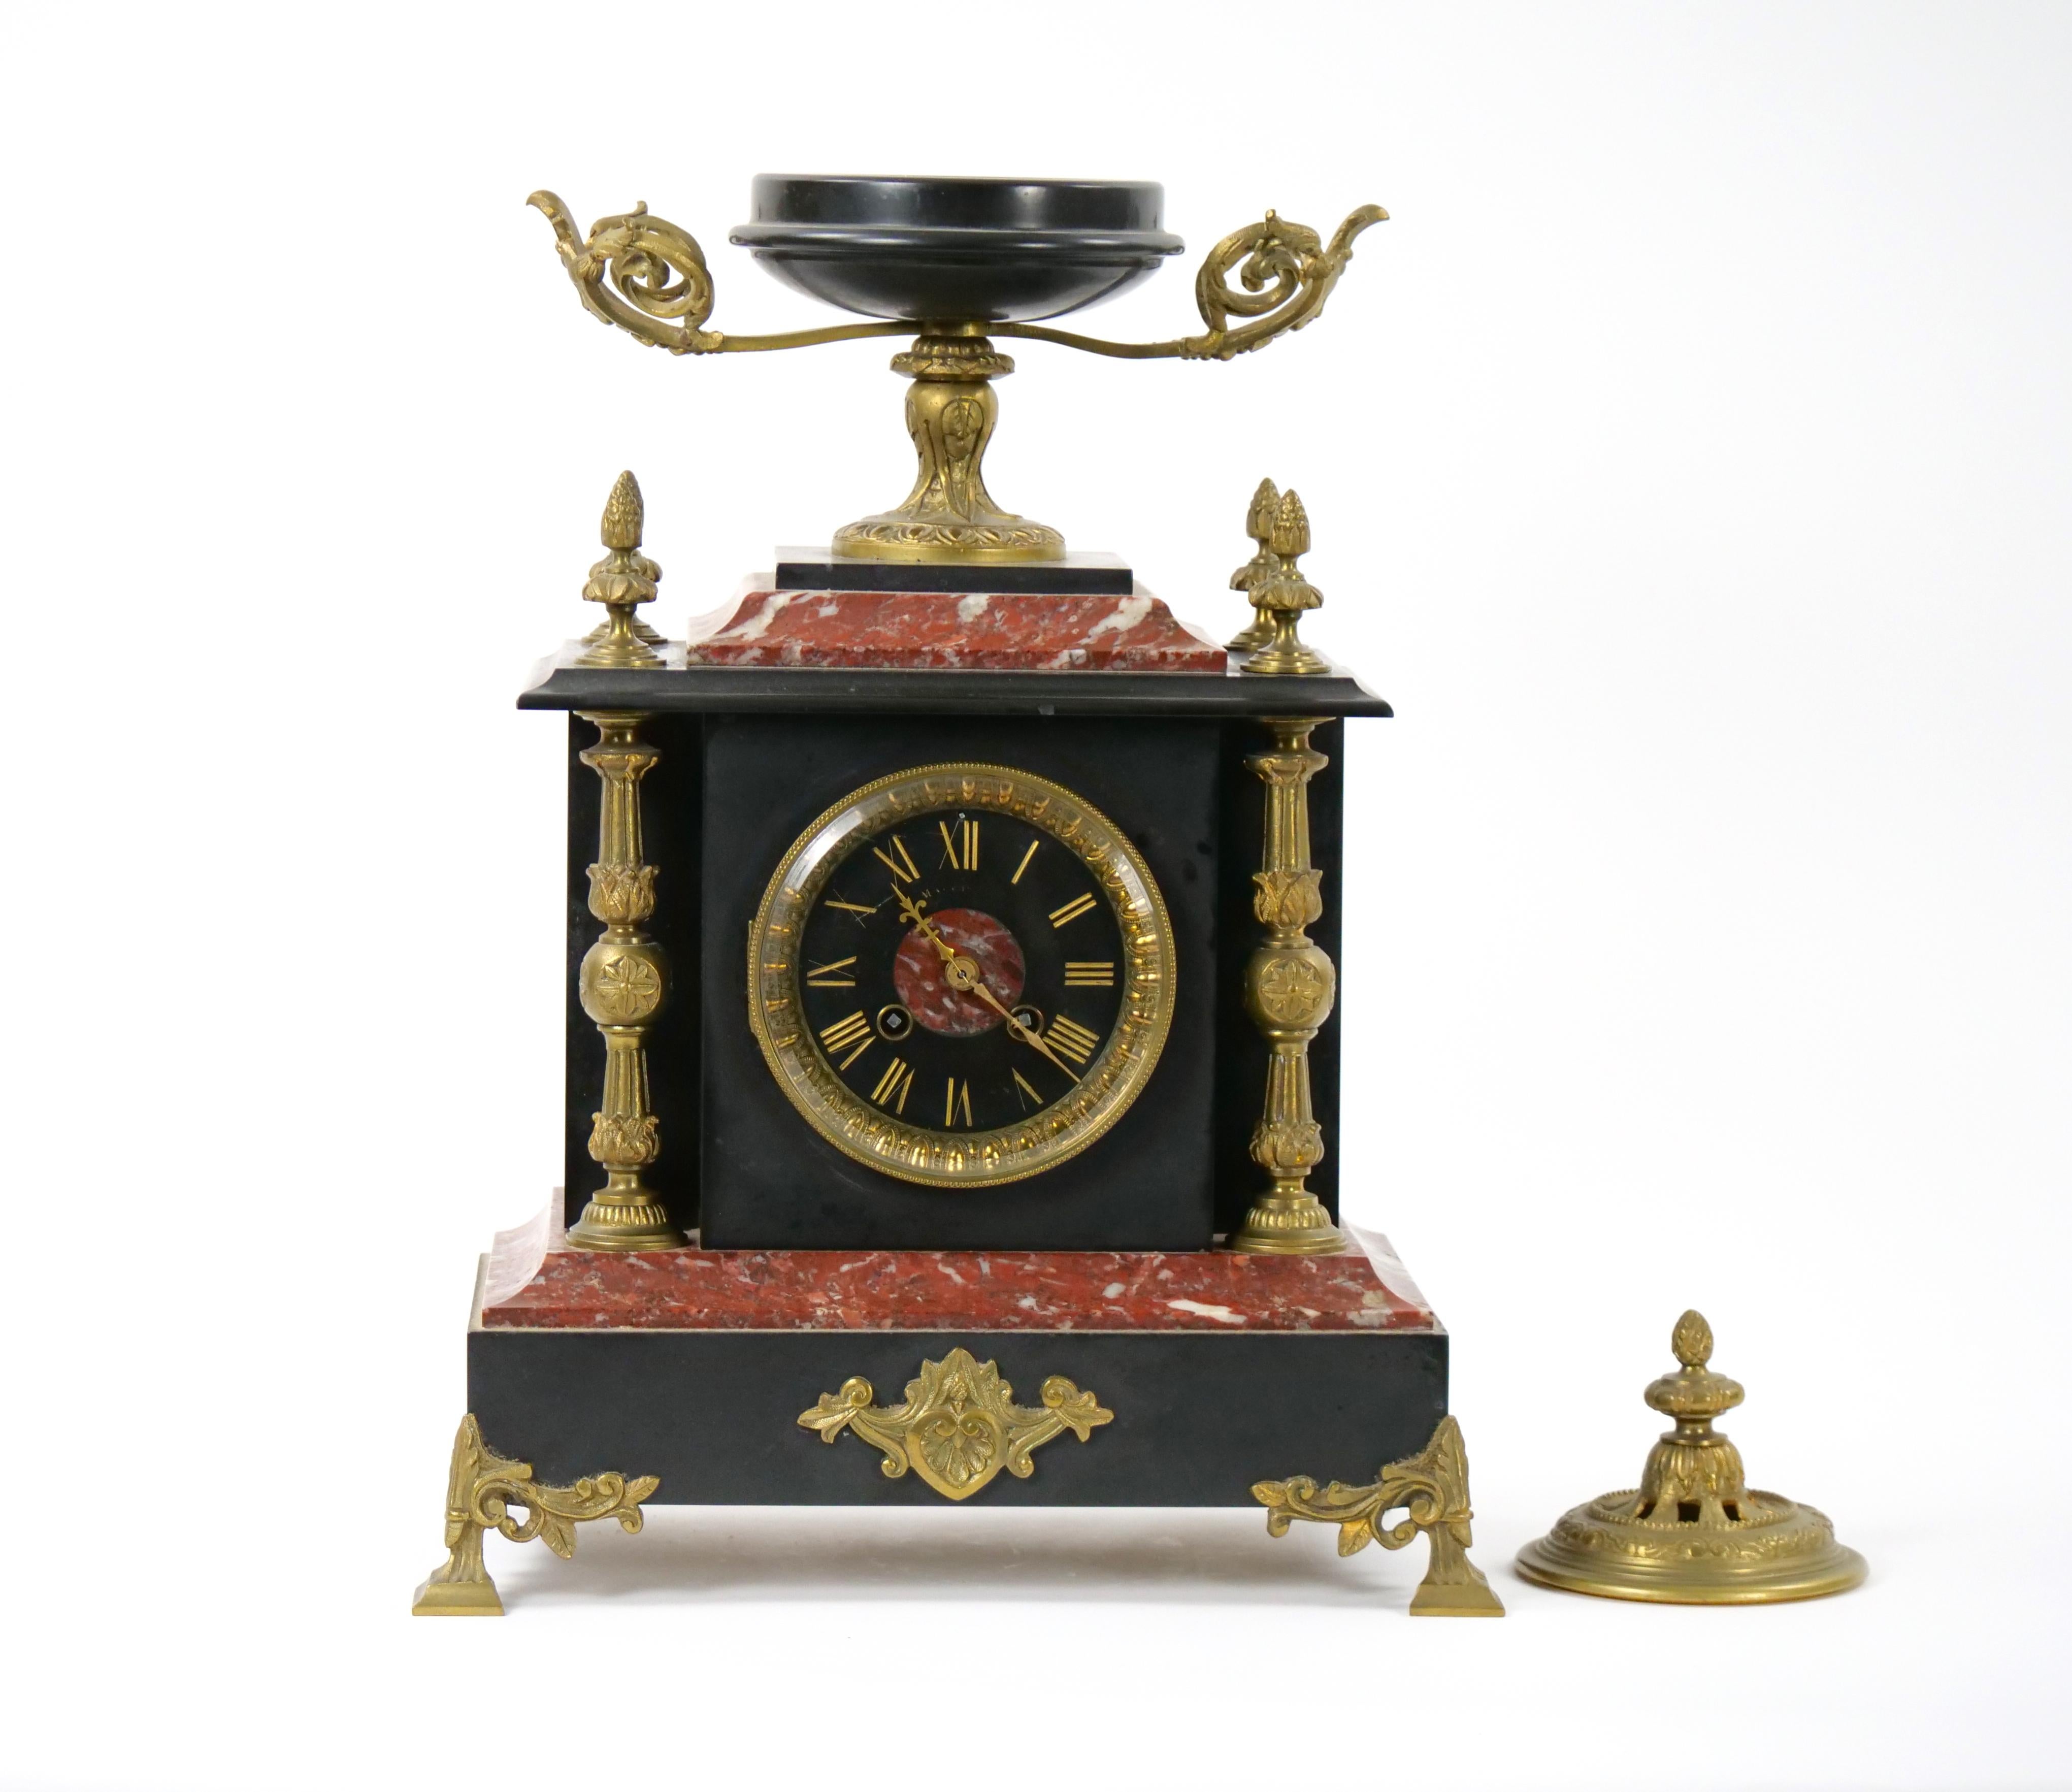 
Transport yourself to the elegance of the 19th century with this exquisite French Gilt Bronze-Mounted Slate and Rouge Marble Mantel Clock. Meticulously crafted, this timepiece is a celebration of artistry, design, and precision. The fusion of gilt